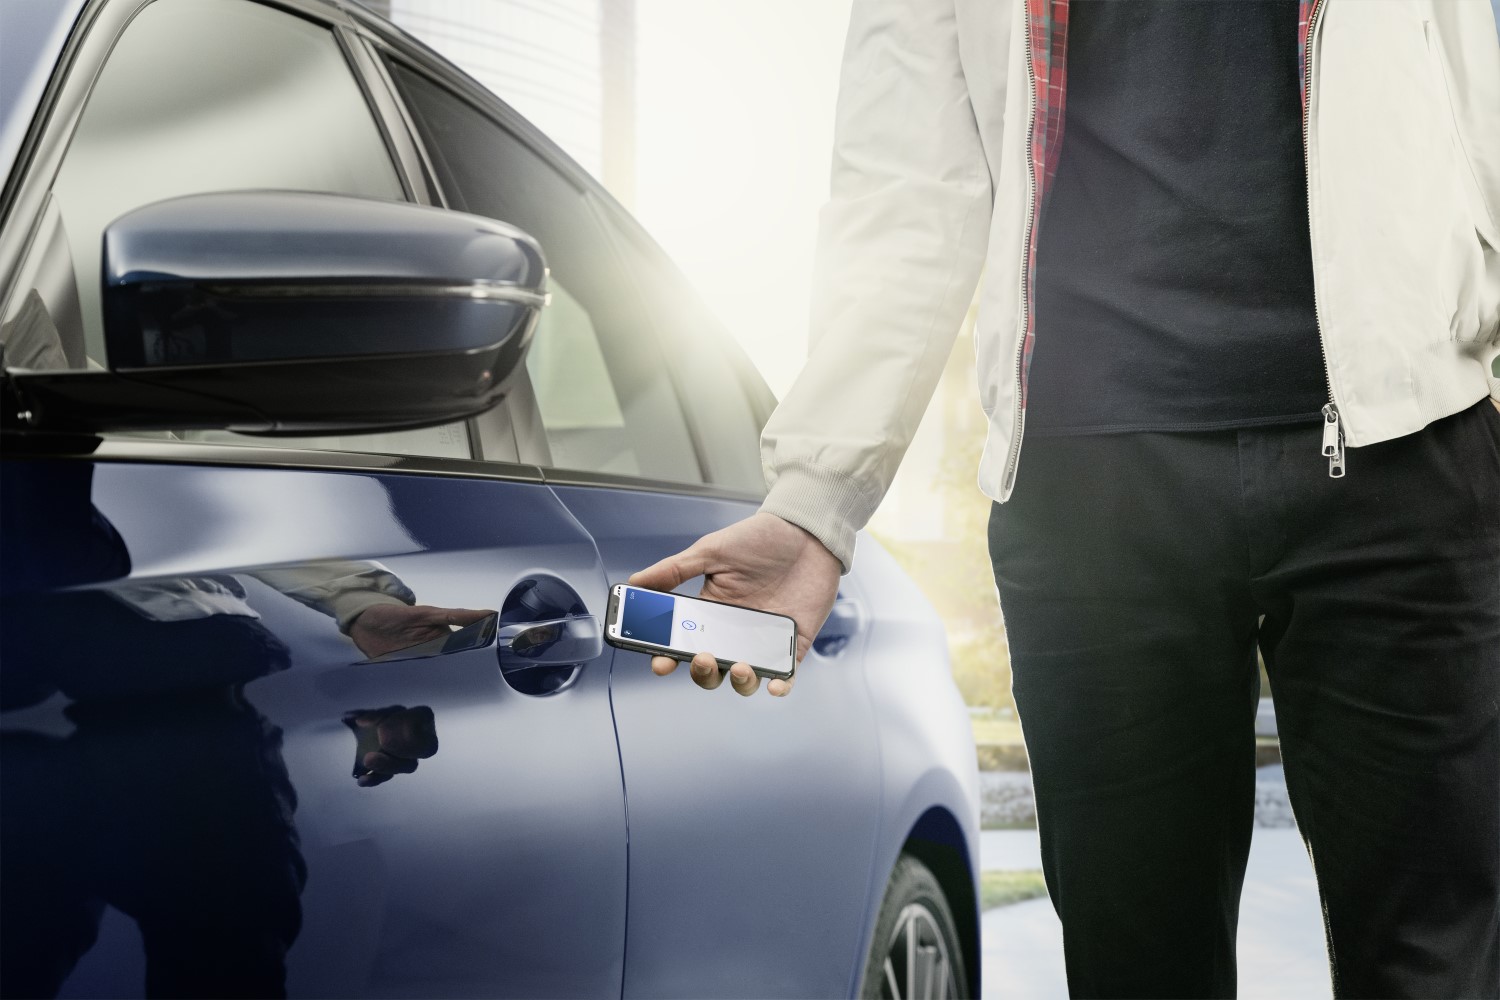 BMW owners won't need to carry a car key any longer